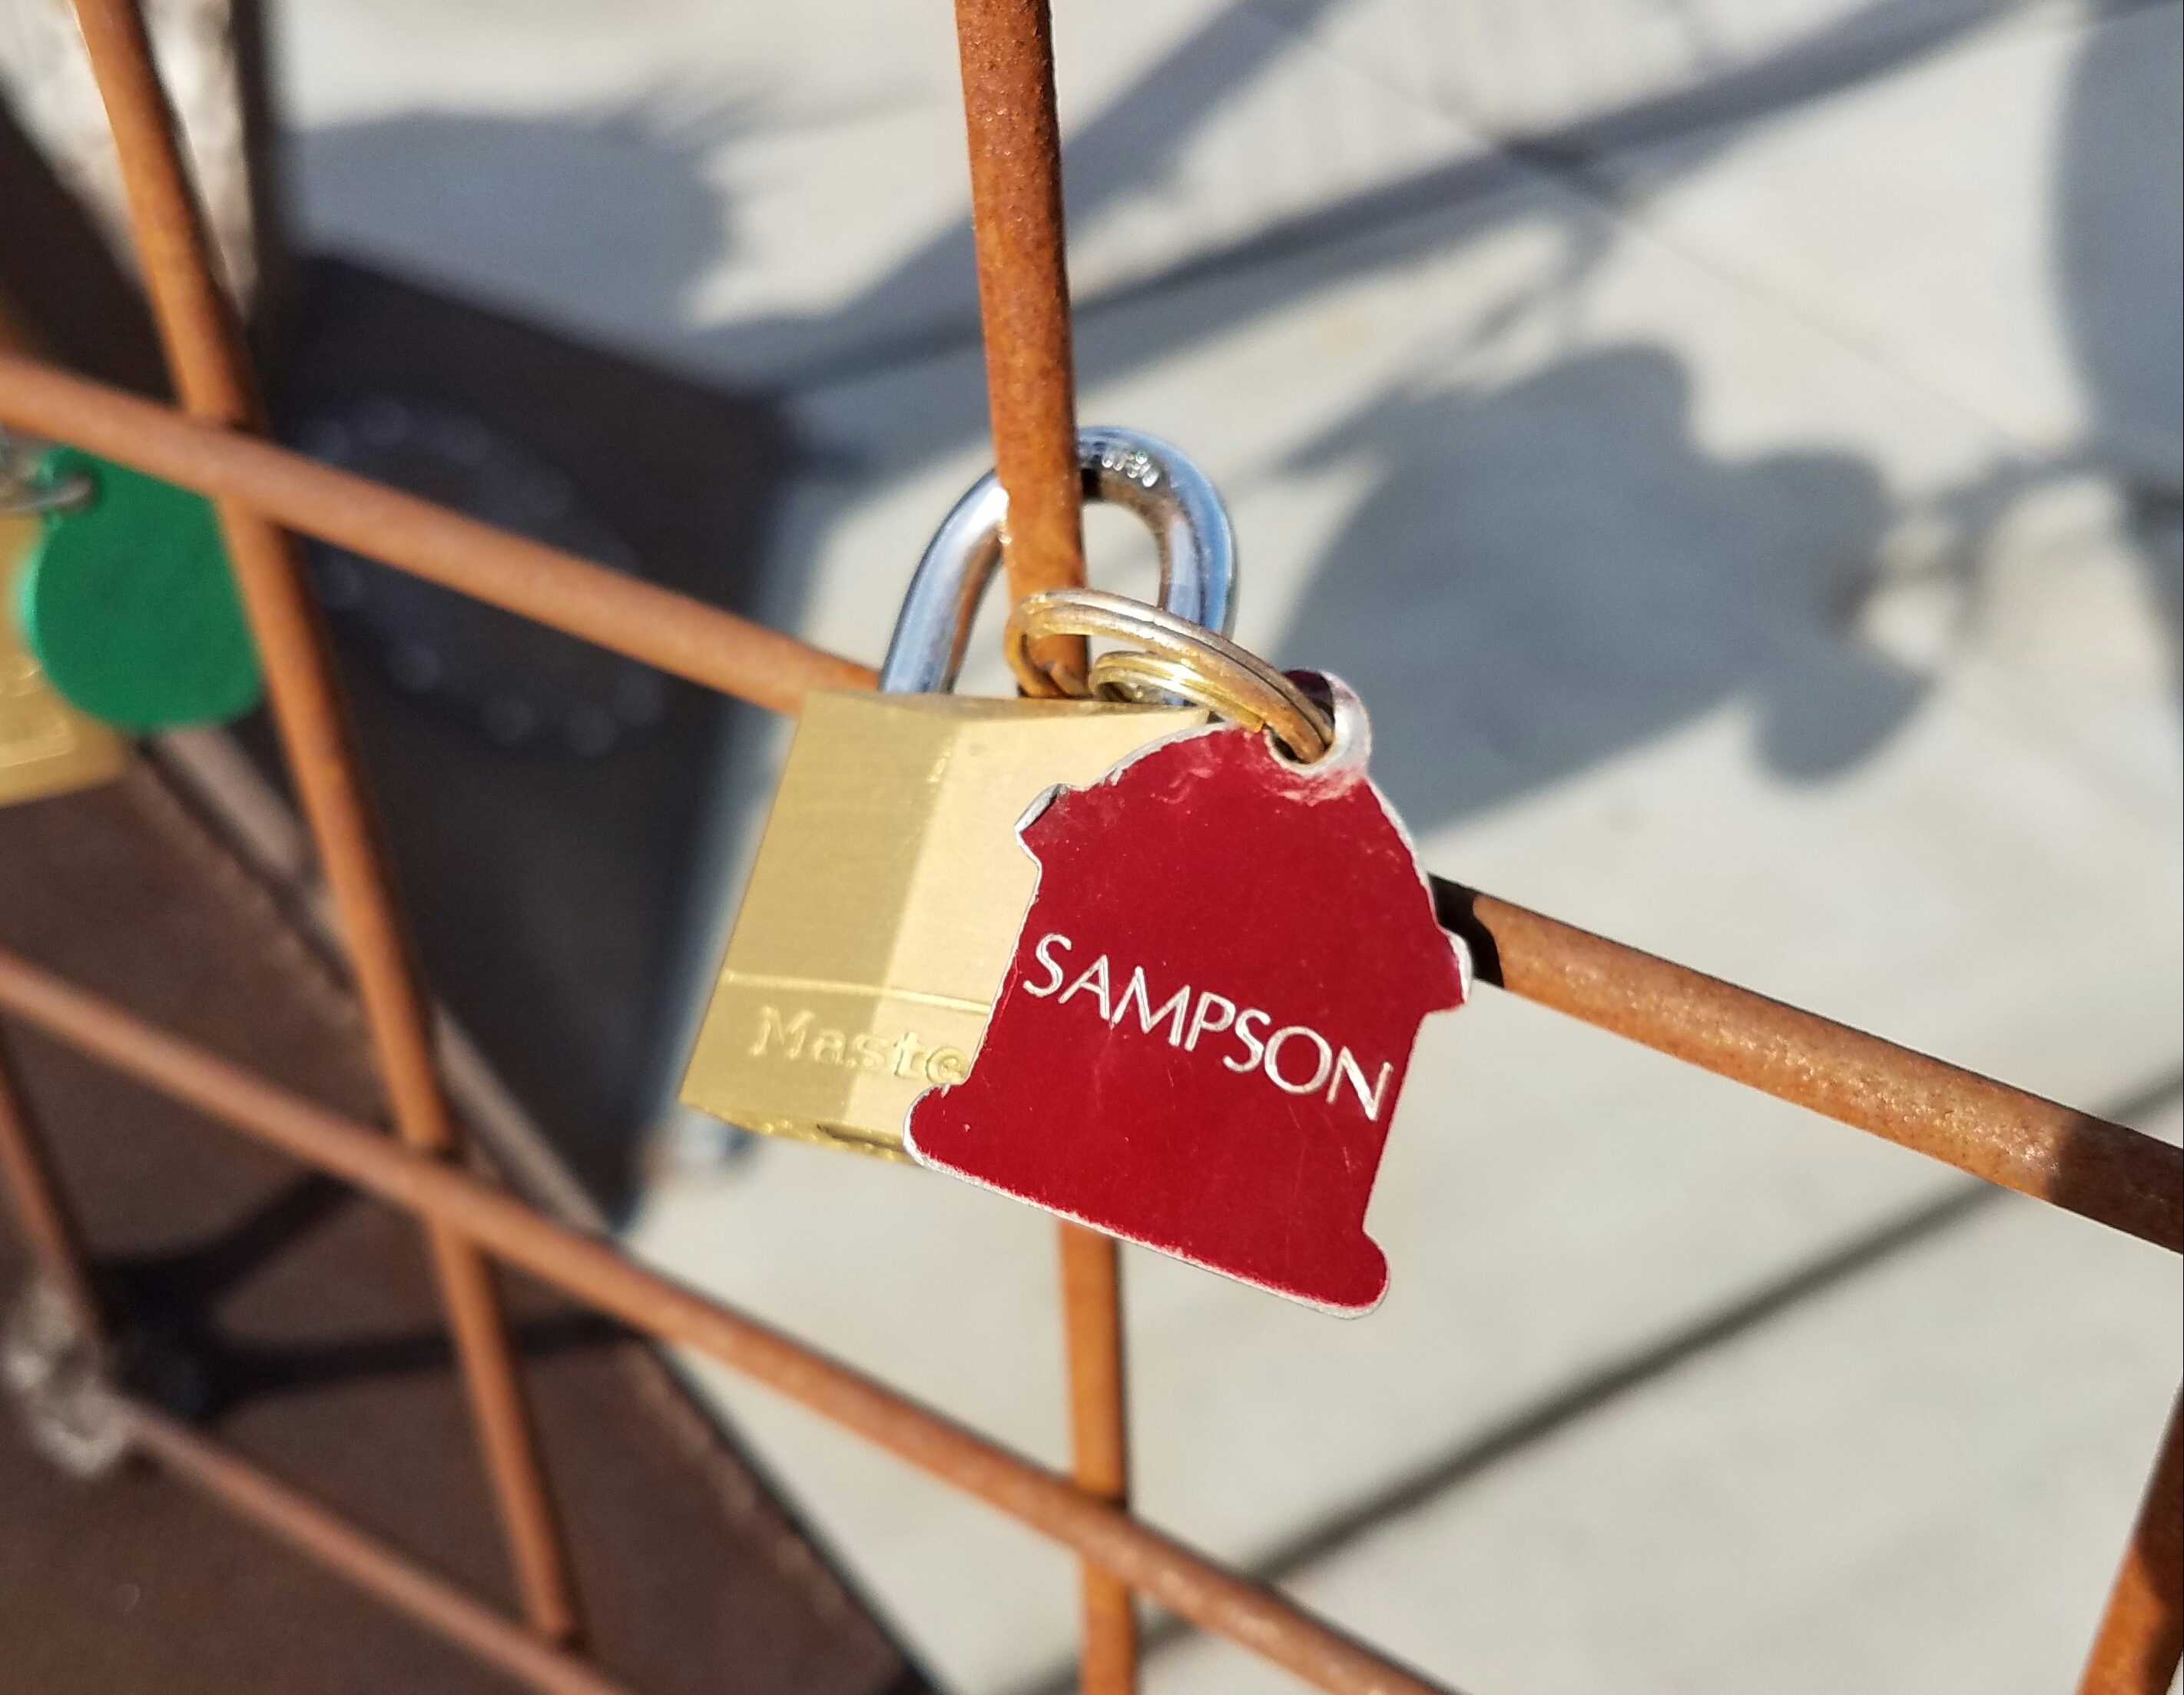 Love Locks Sculpture in Vista: A Place to Show Your Love | YNC